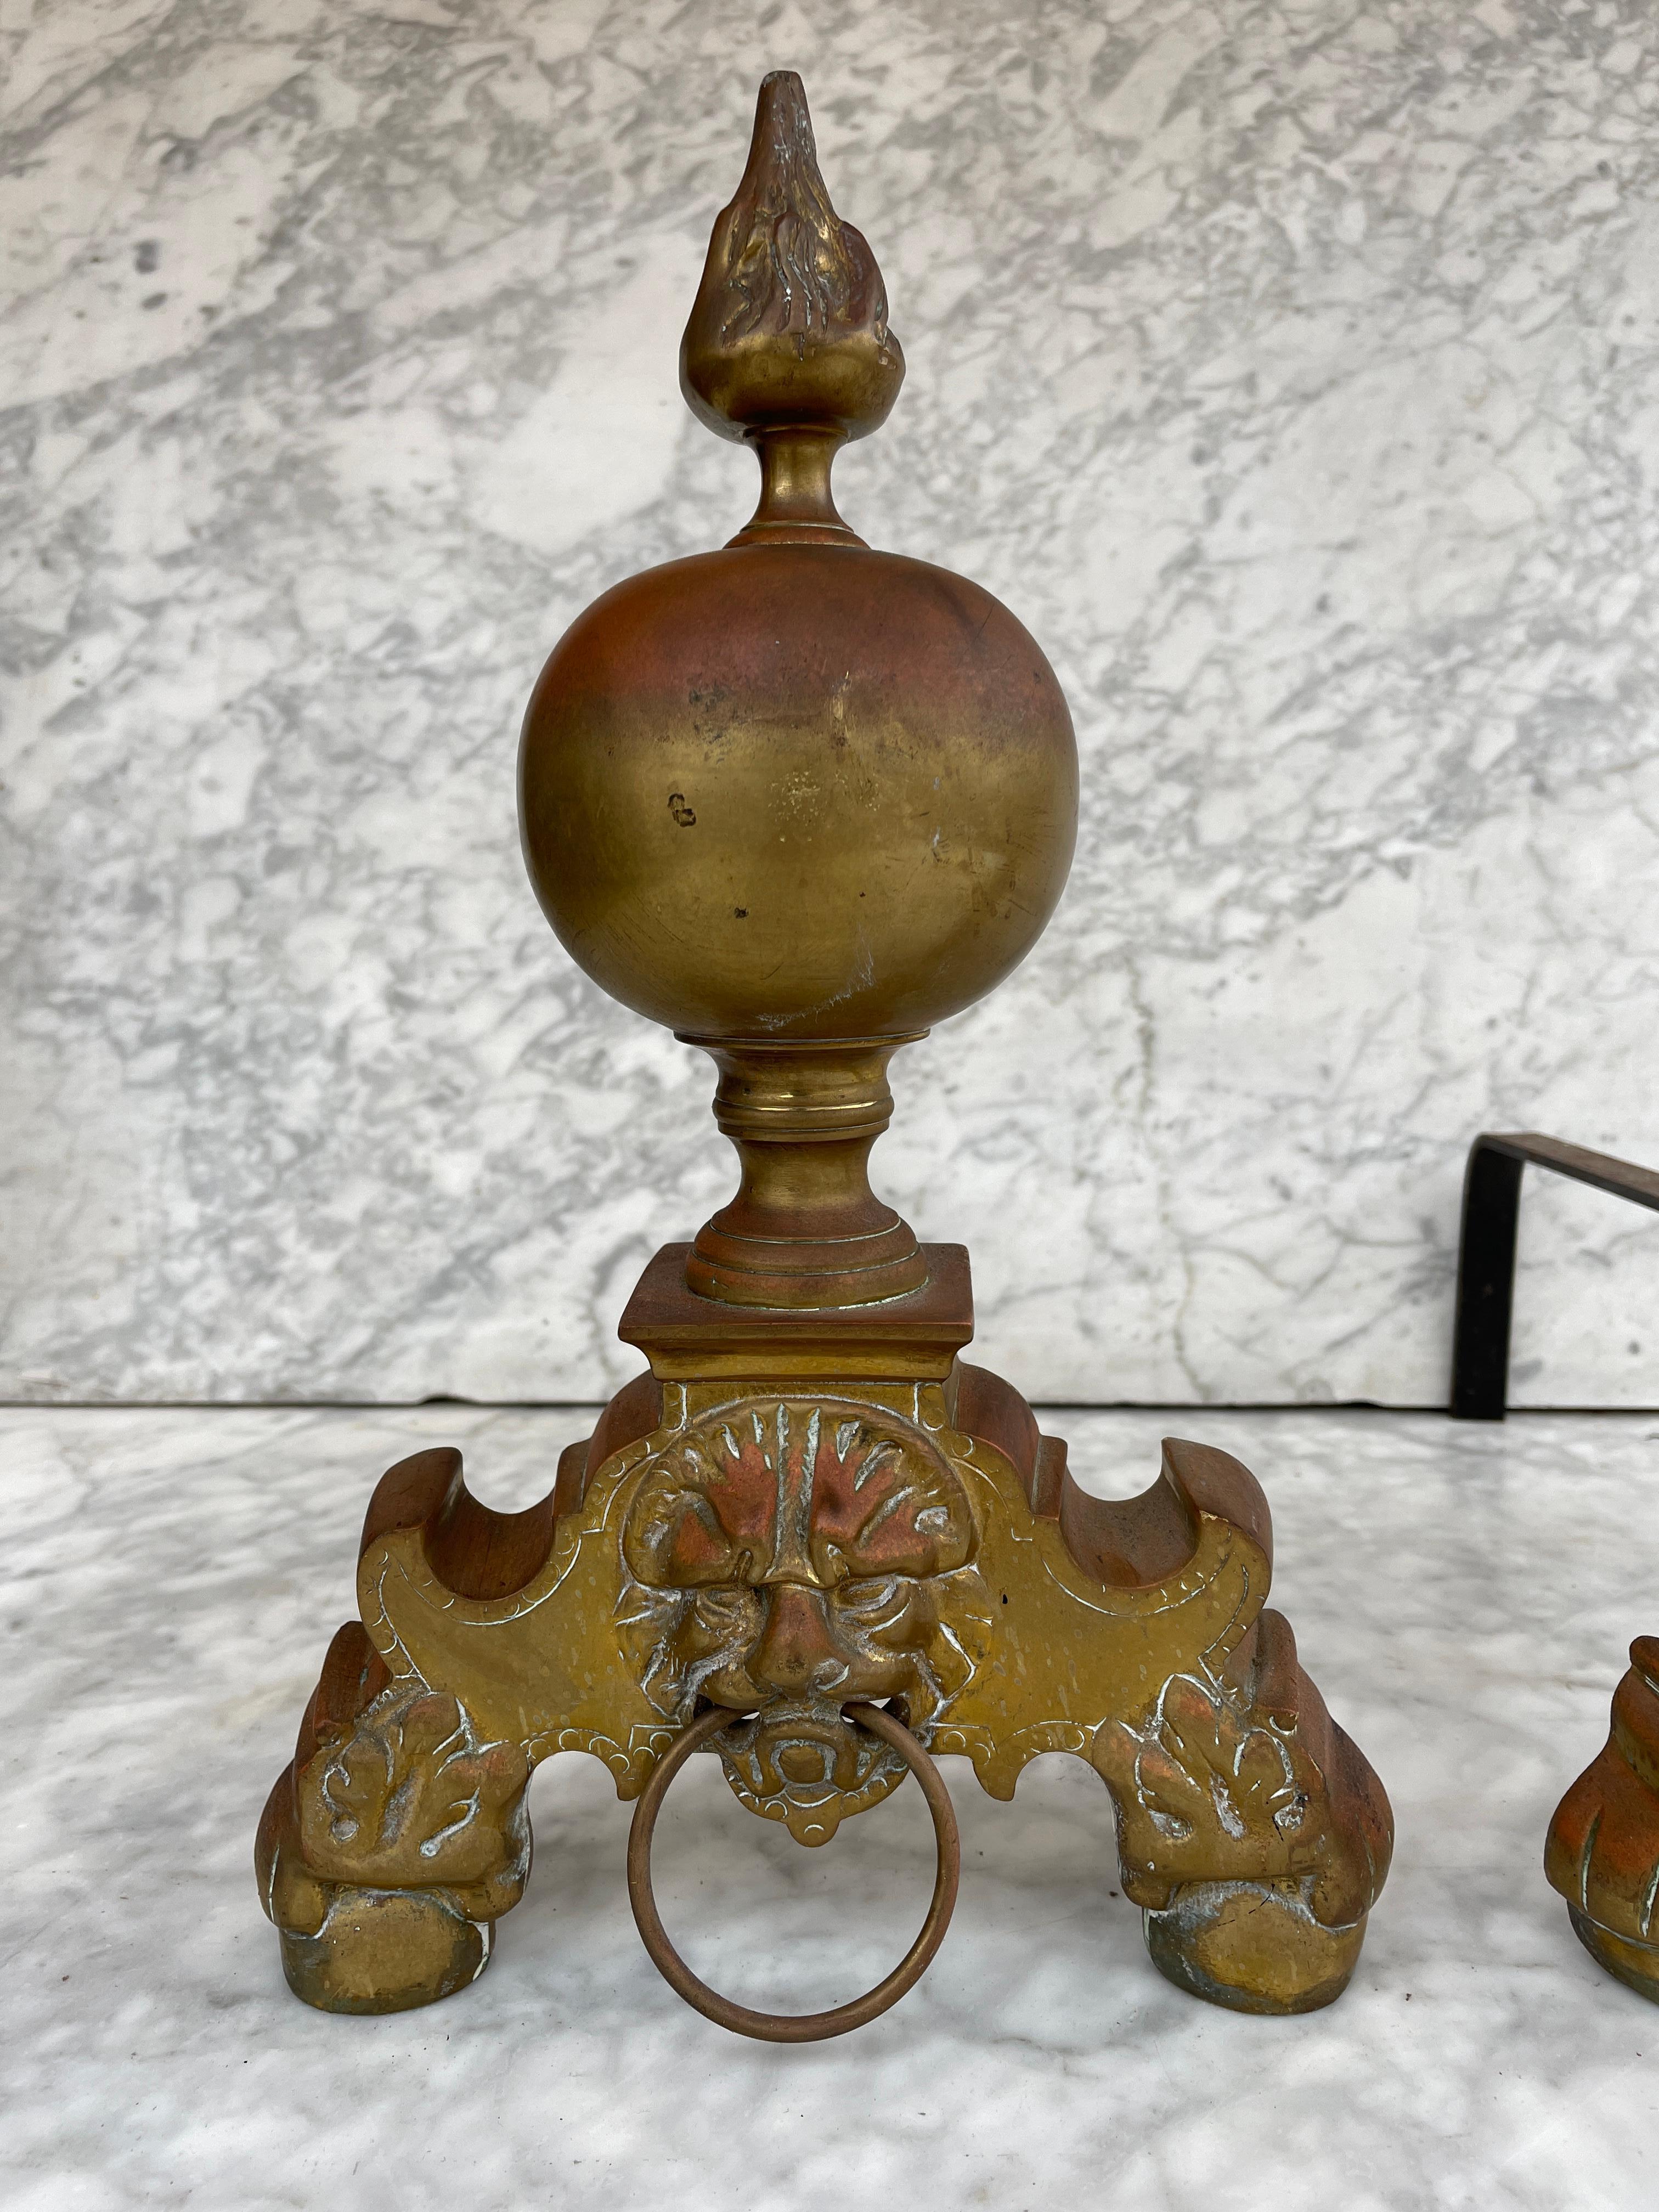 Antique French andirons or firedogs, 19th century cast iron and brass with a lion sculpture op front.
 